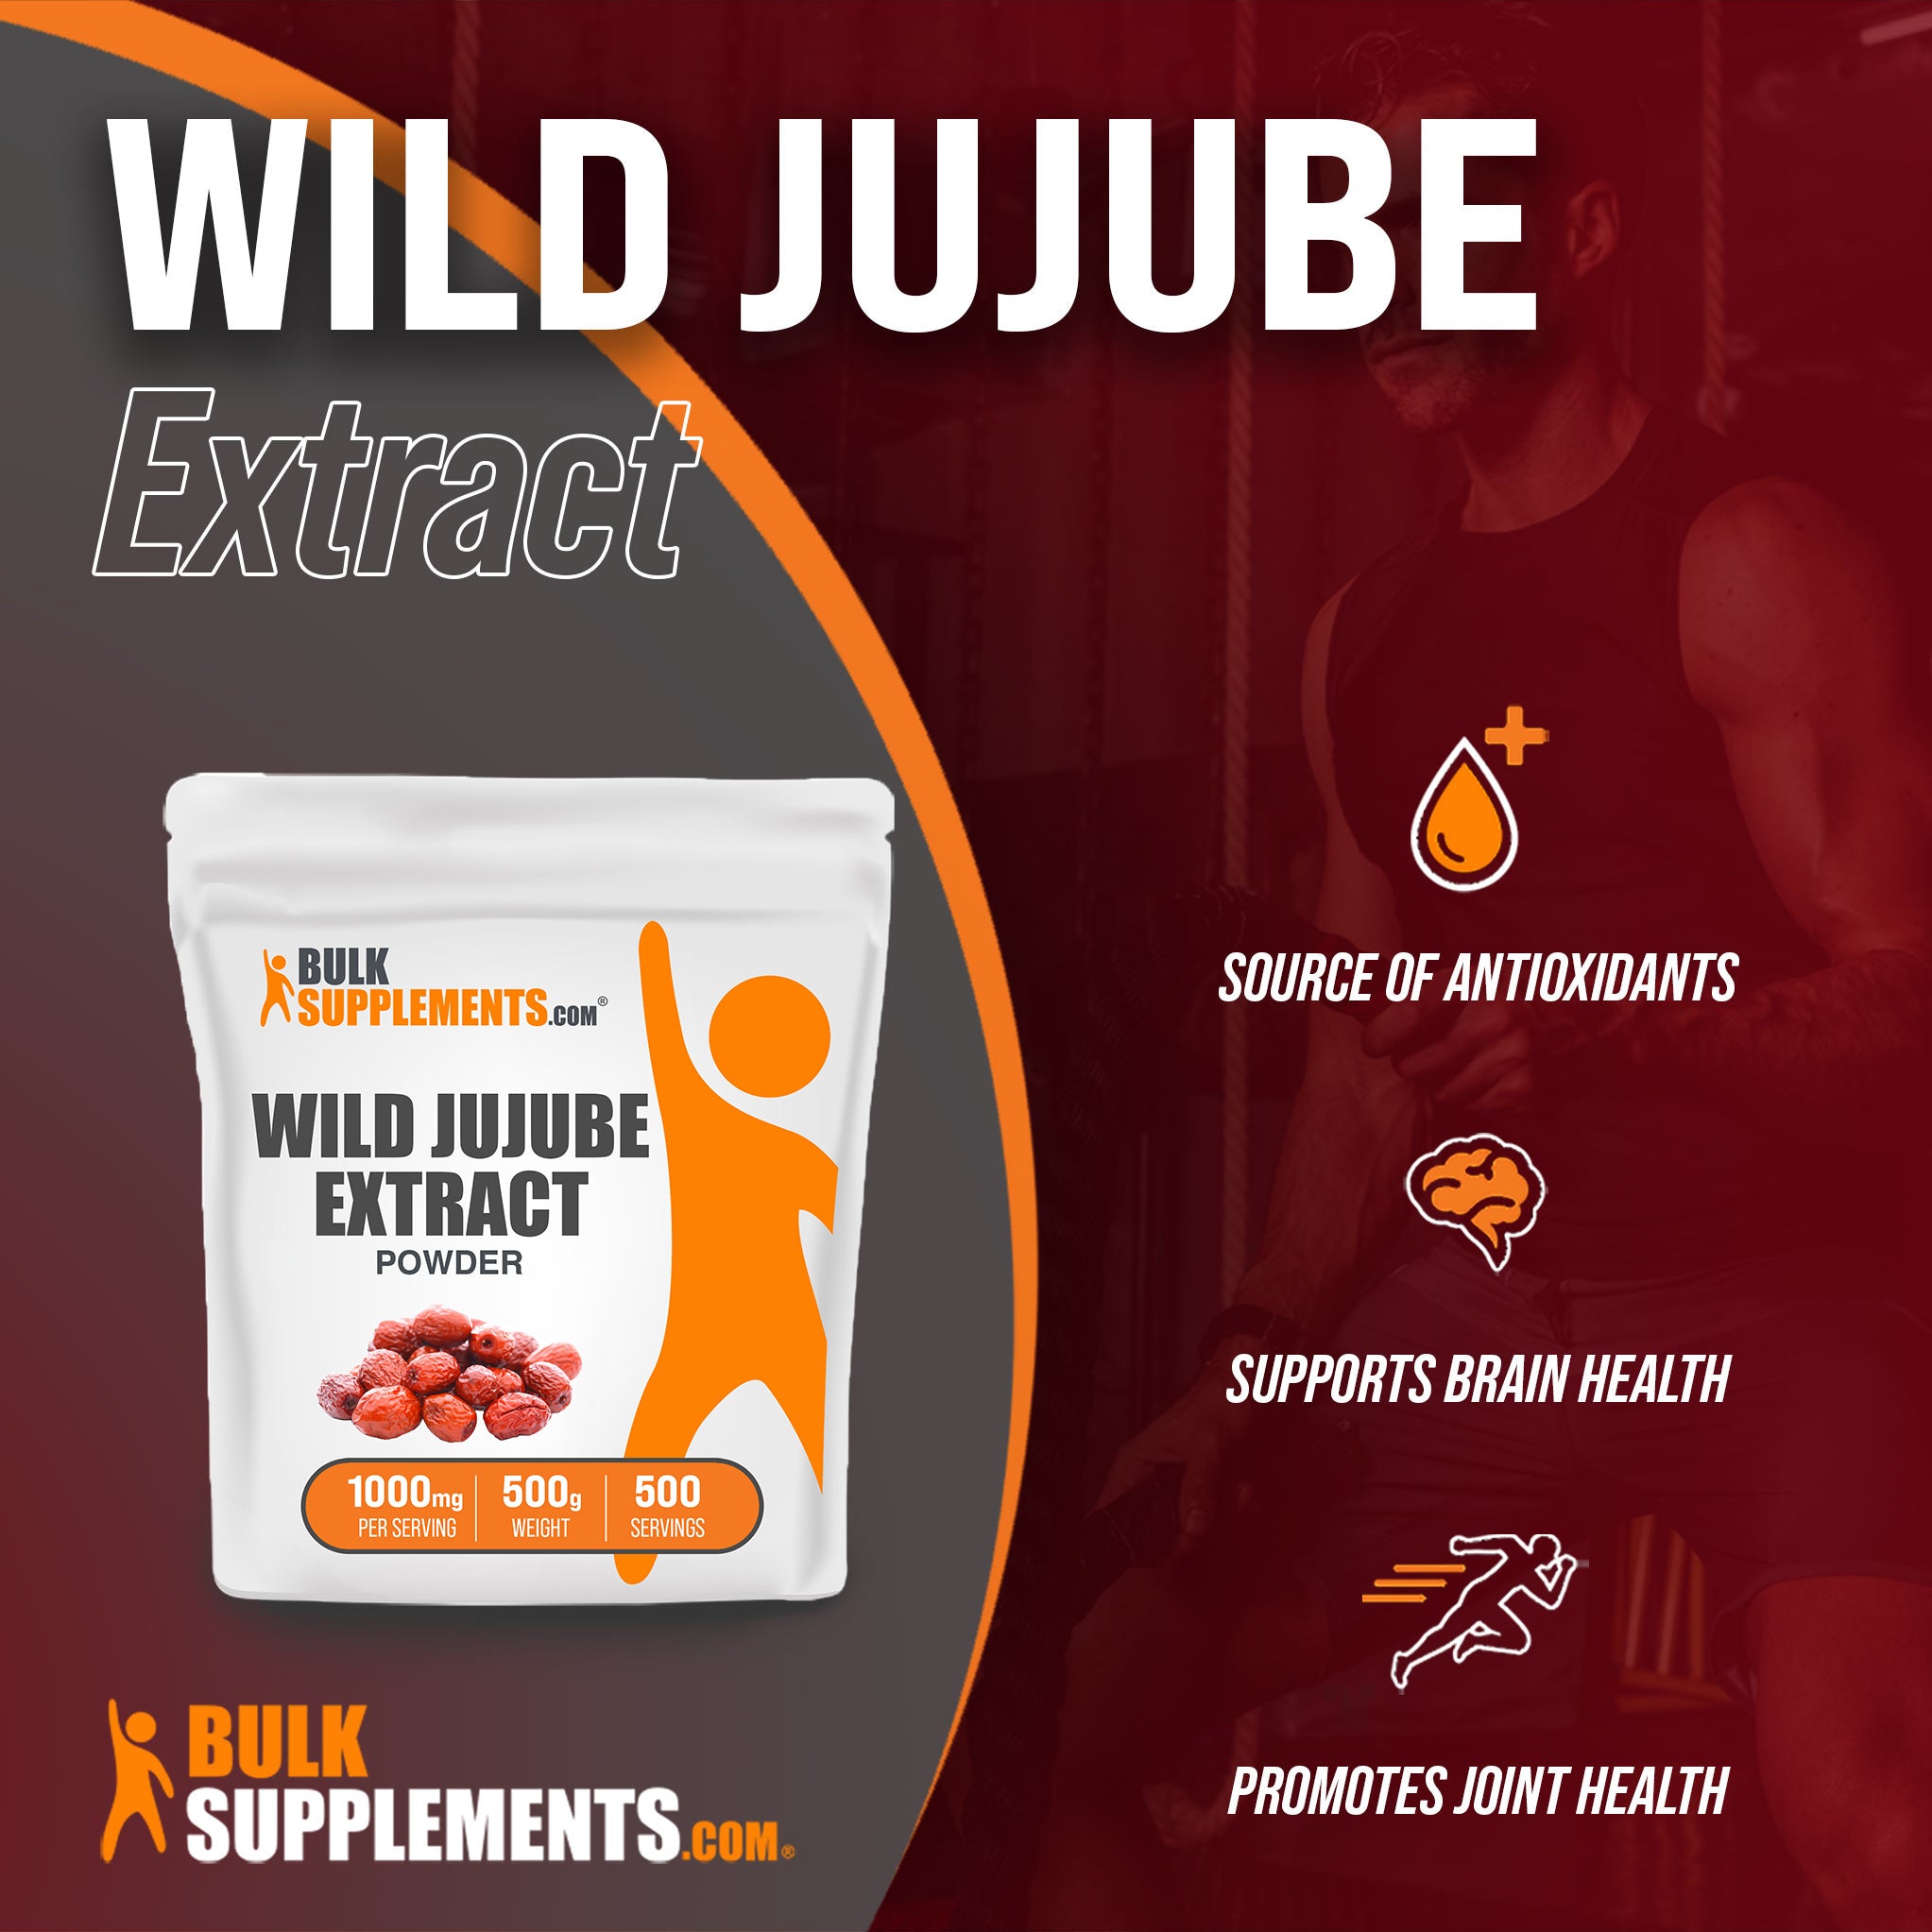 Benefits of Wild Jujube Extract: source of antioxidants, supports brain health, promotes joint health